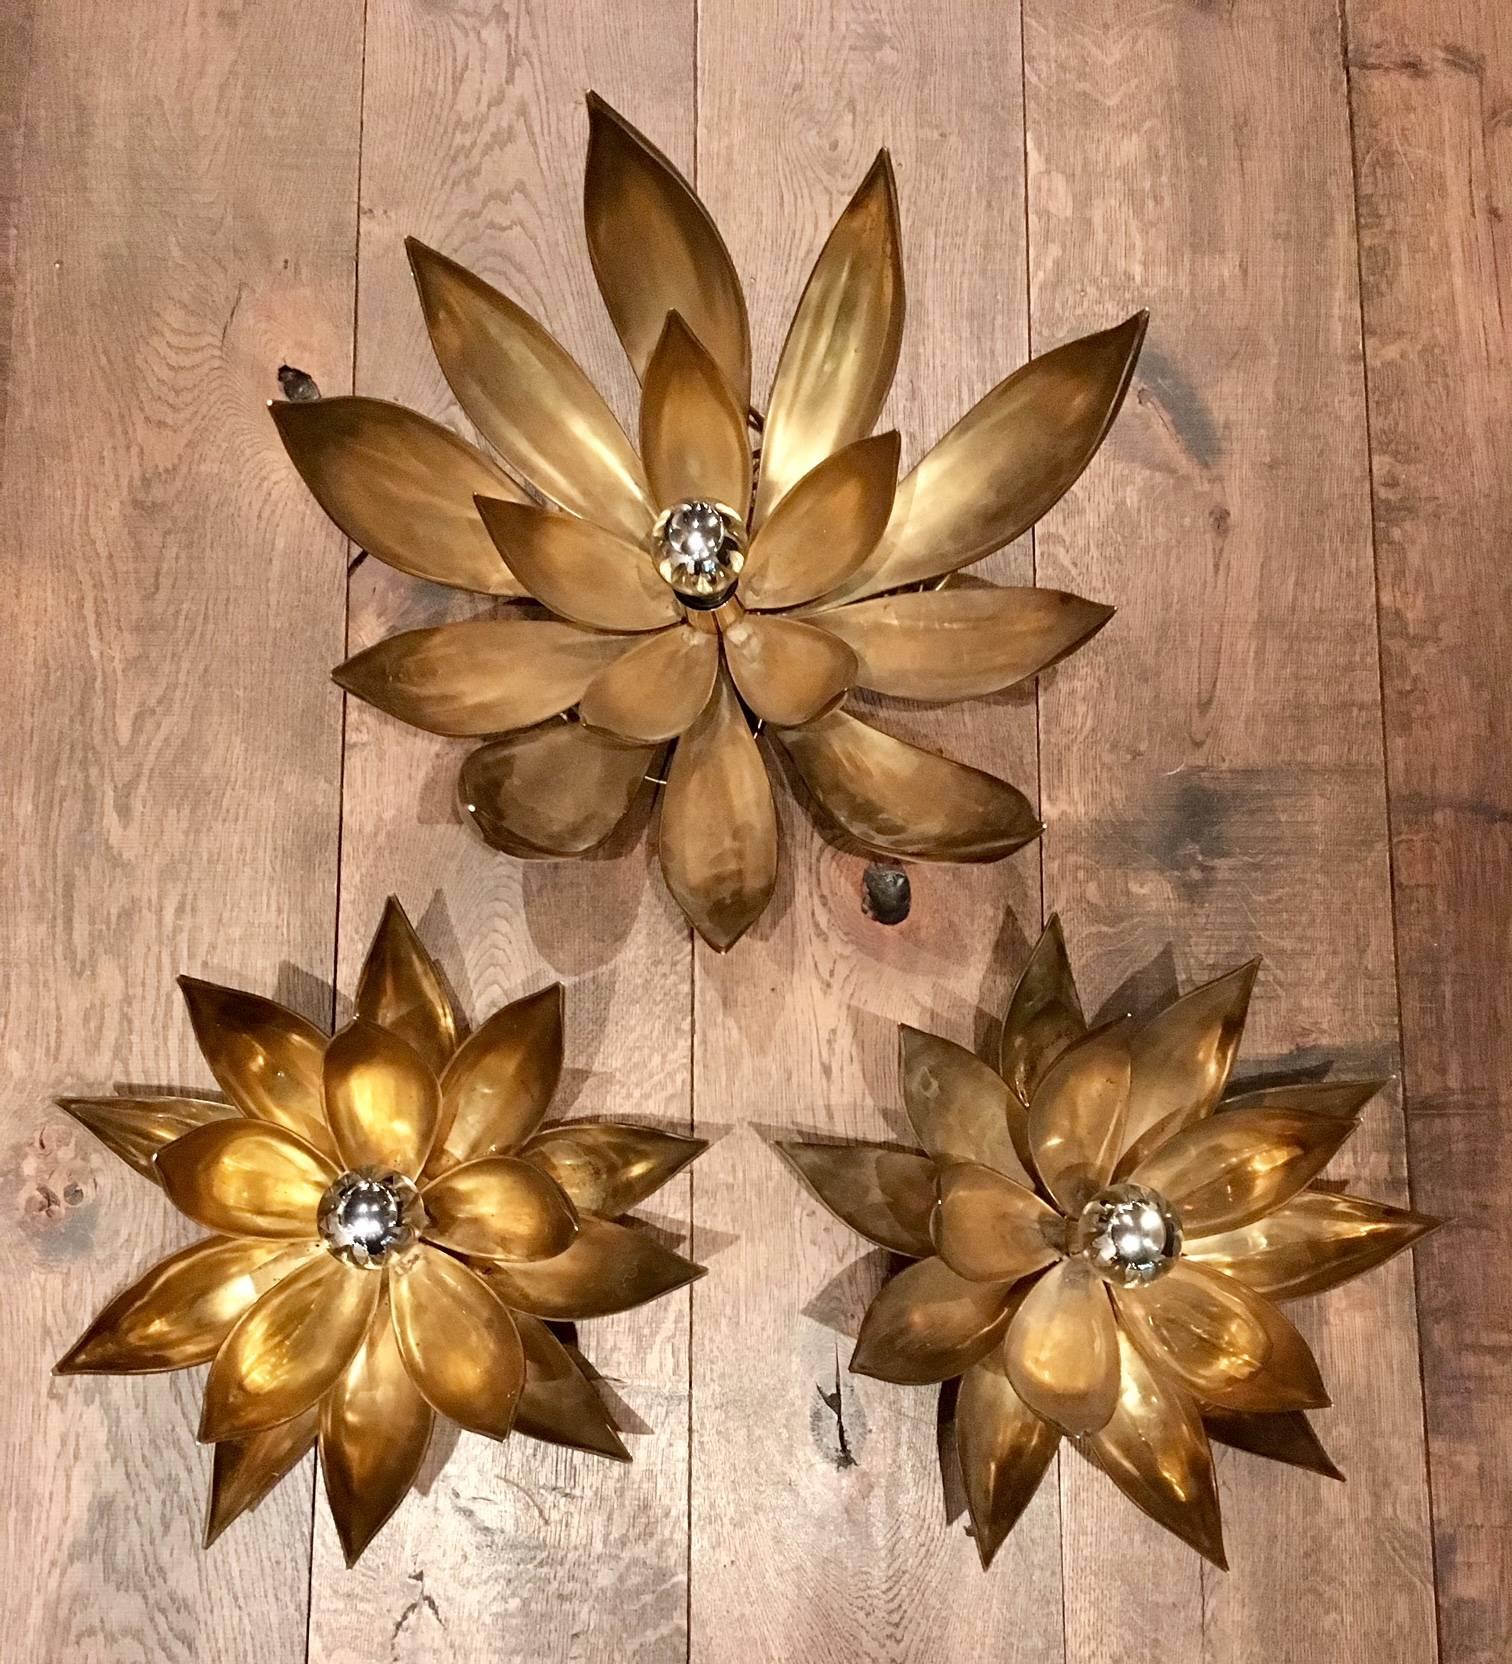 Three very heavy 3D brass wall lights in flower shape. They were made in France in the 1970s. The design is related to designs by Maison Jansen and Maison Charles, but bigger and heavier.

There are two smaller lights with a 40 cm diameter (24 cm